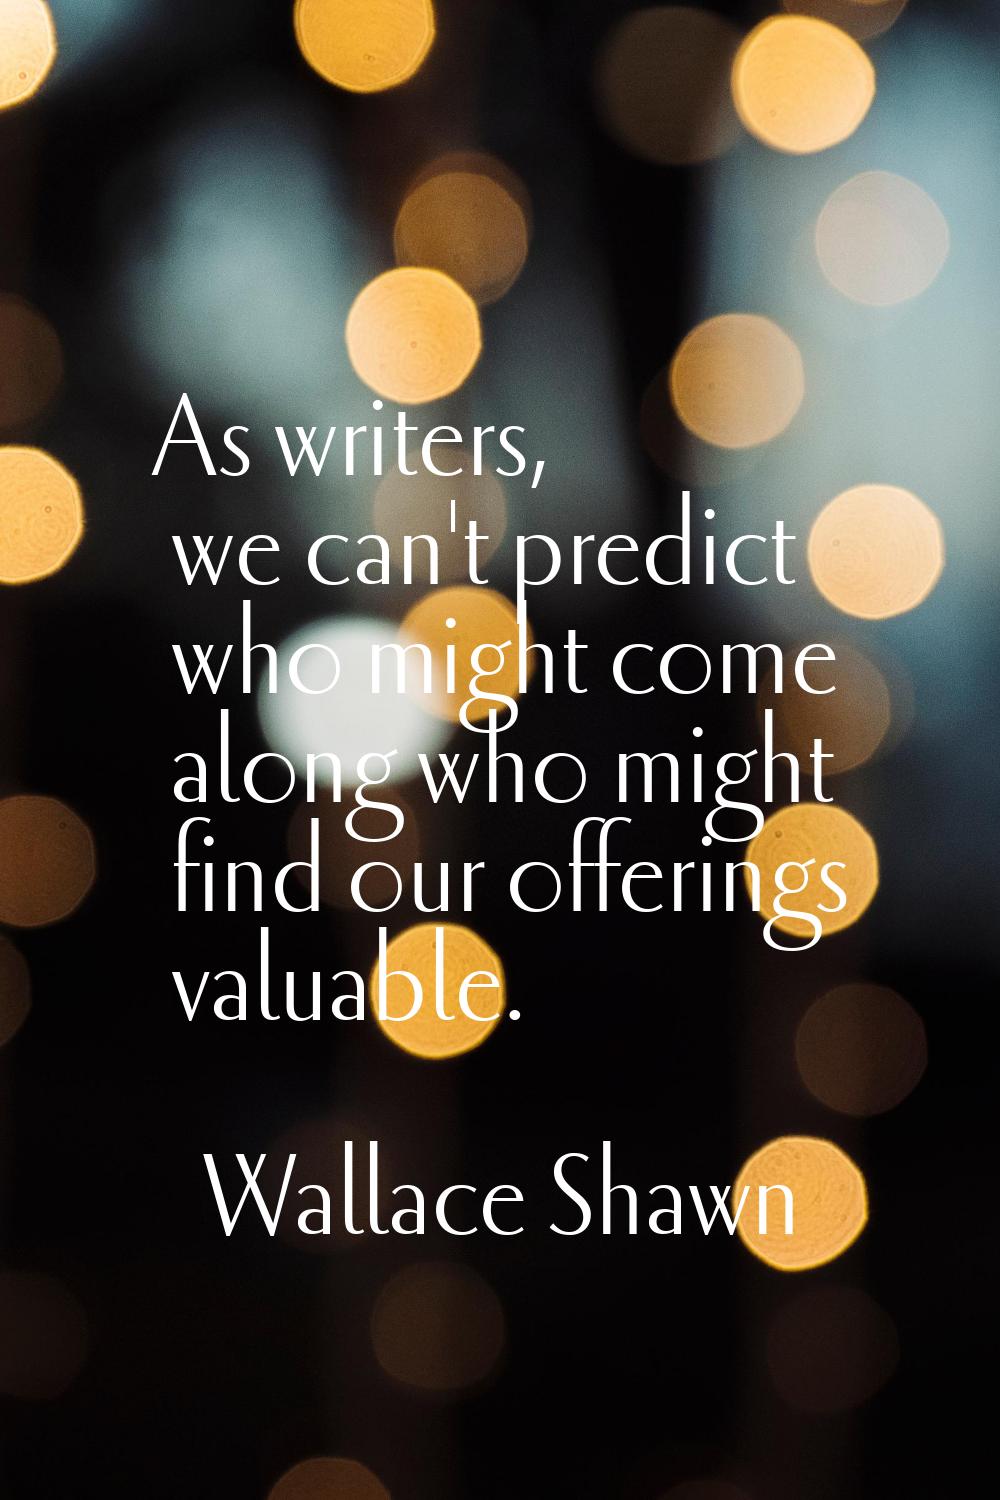 As writers, we can't predict who might come along who might find our offerings valuable.